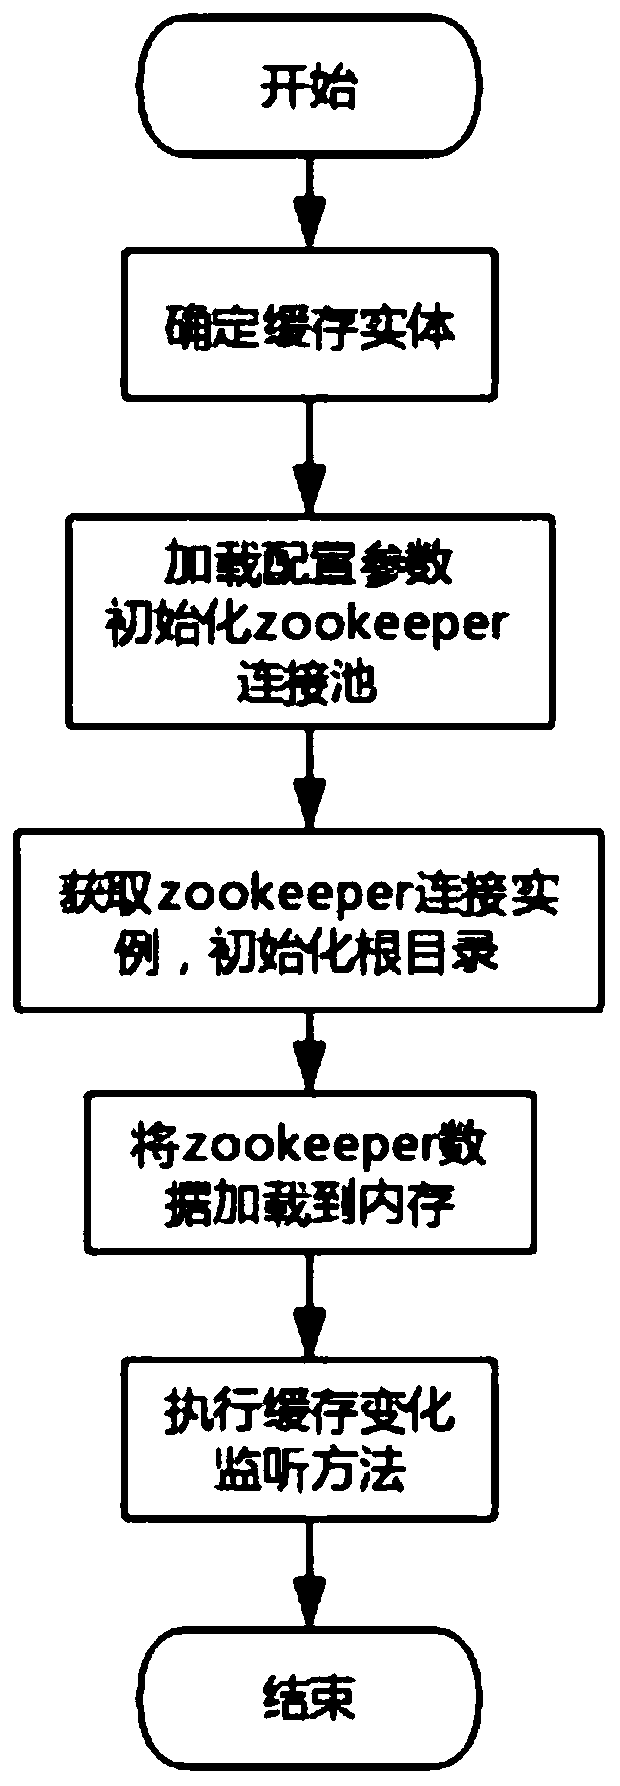 A distributed architecture data consistency method based on a Zookeeper